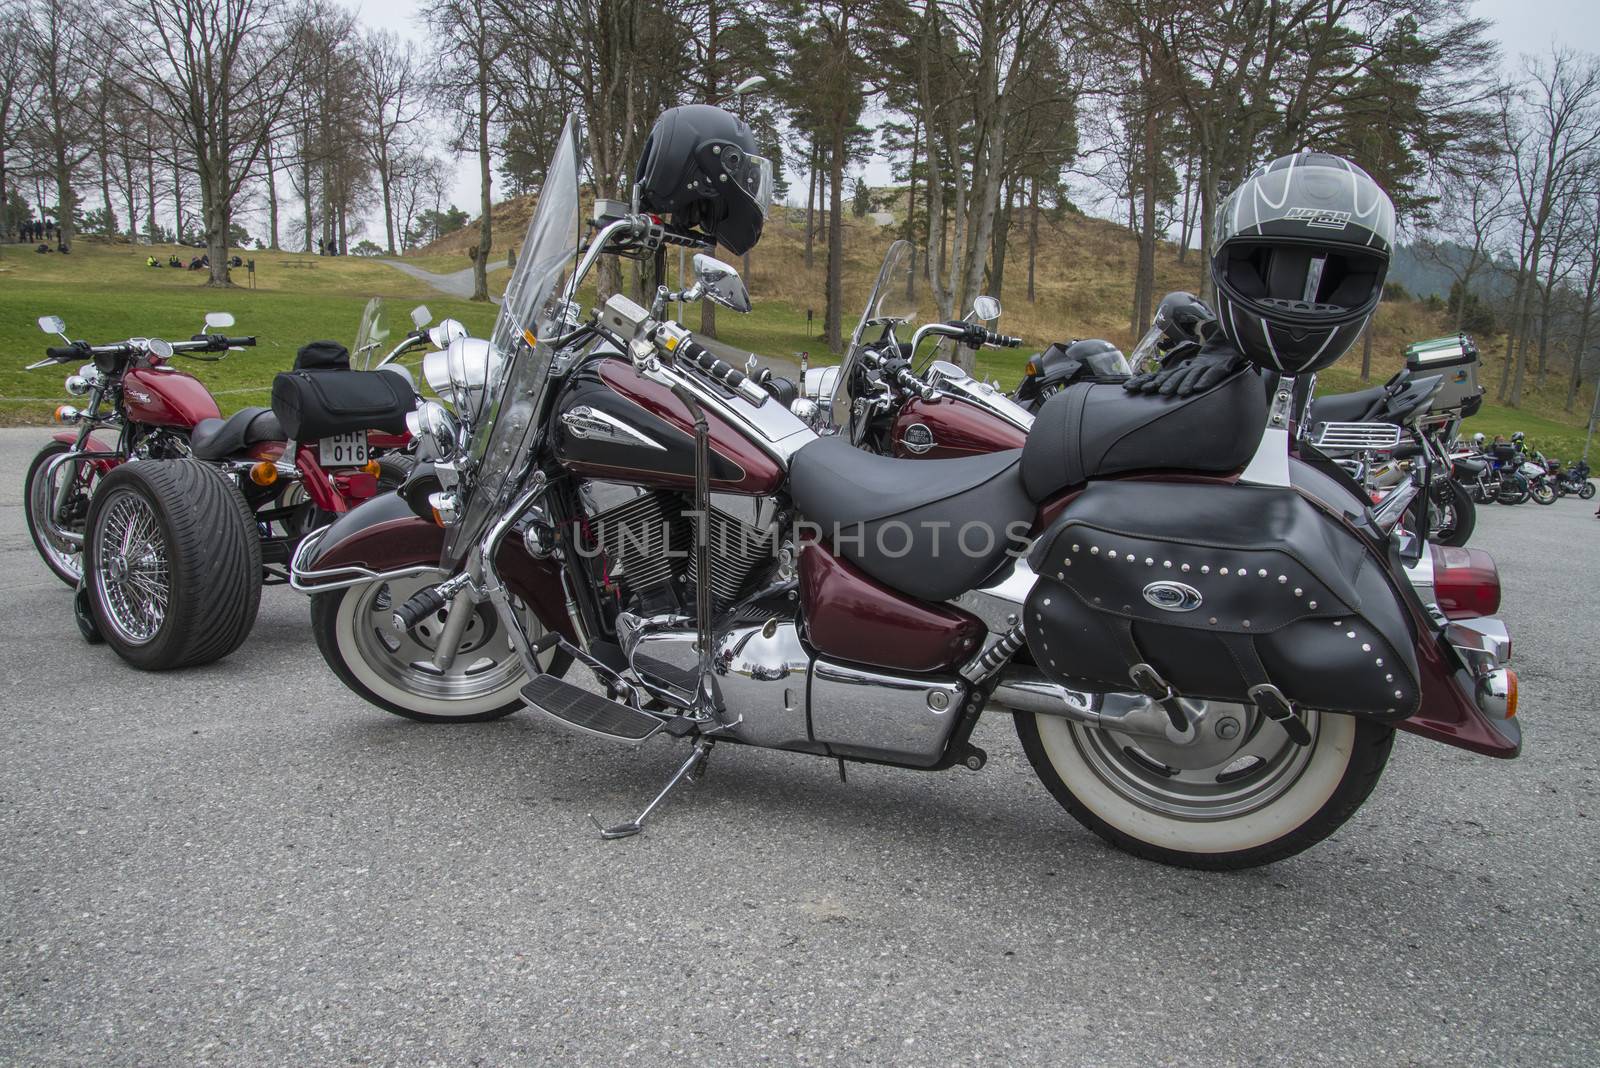 Every year in May there is a motorcycle meeting at Fredriksten fortress in Halden, Norway. In this photo several bikes lined up